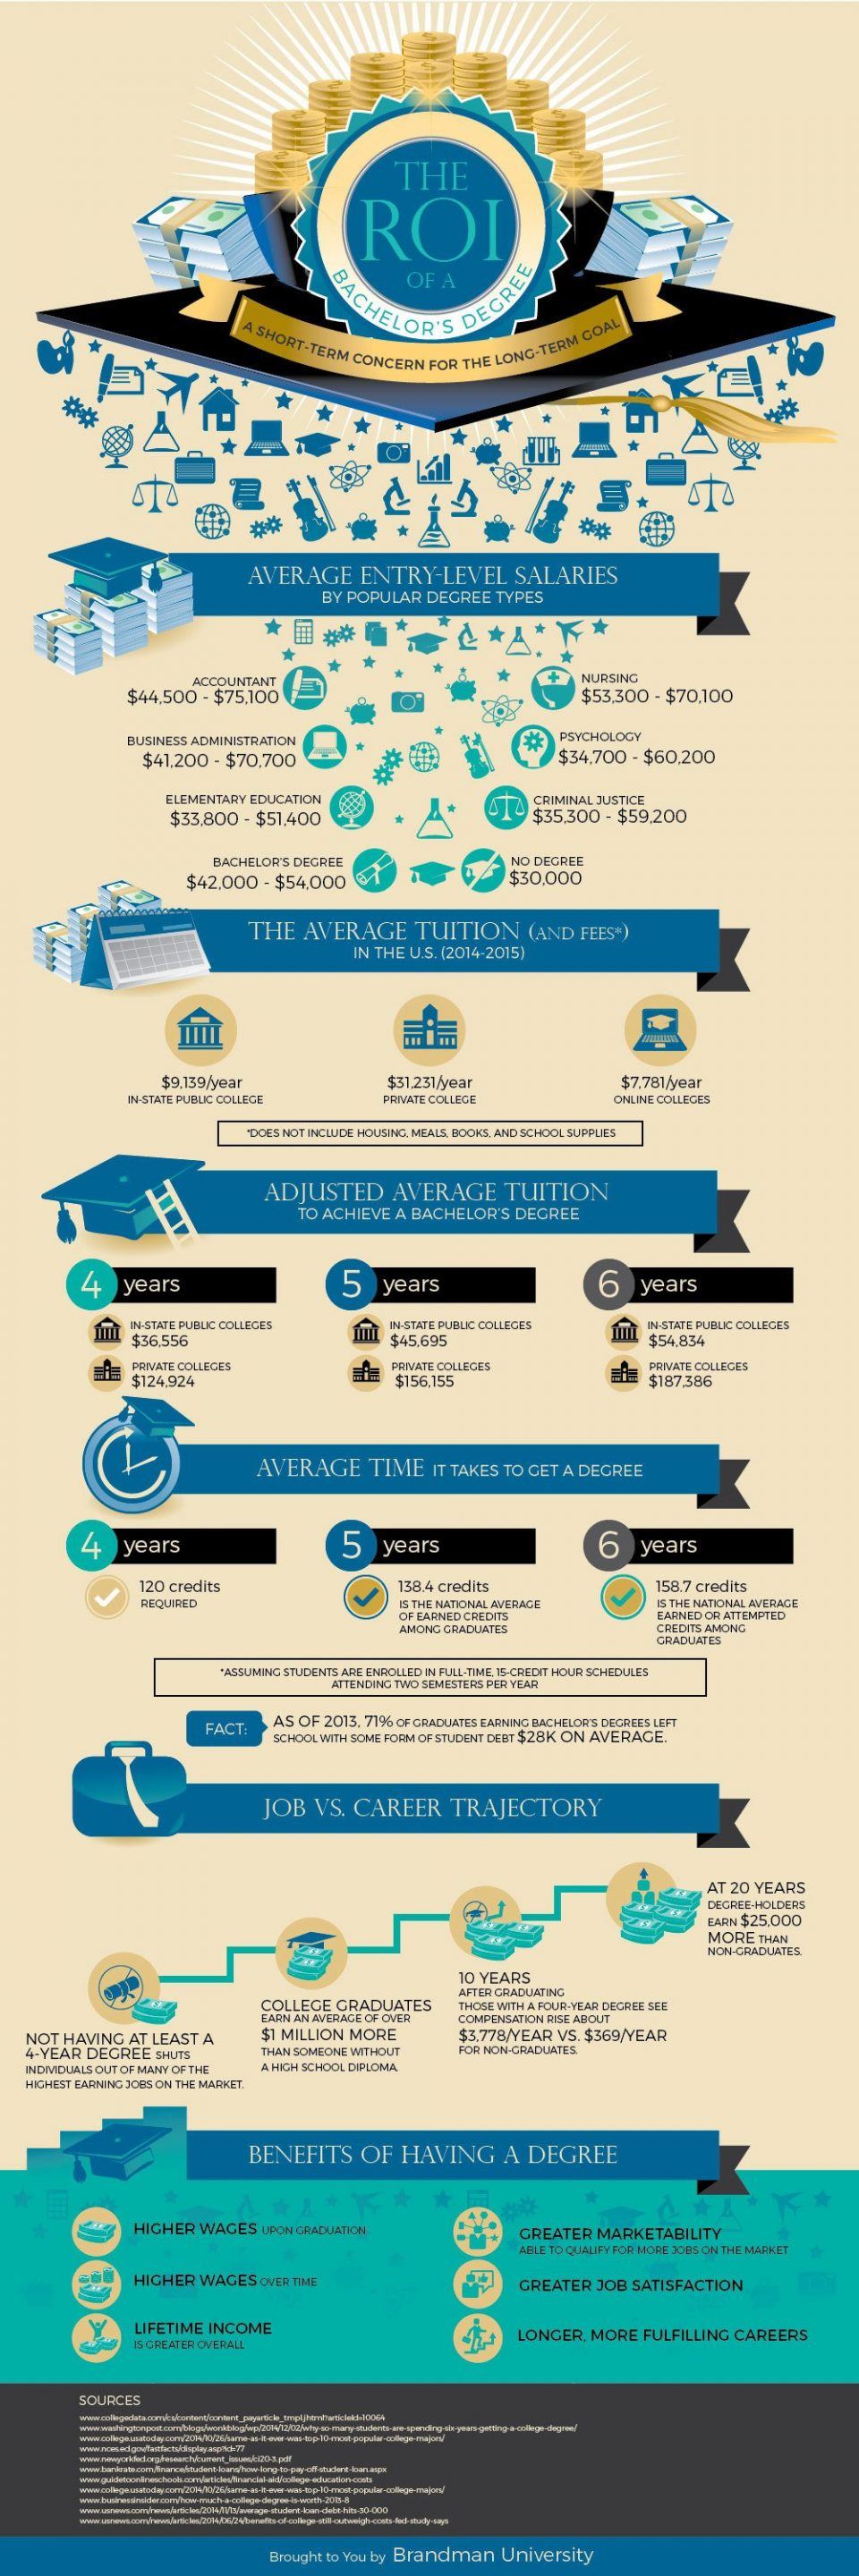 The ROI of a Bachelor's Degree Infographic